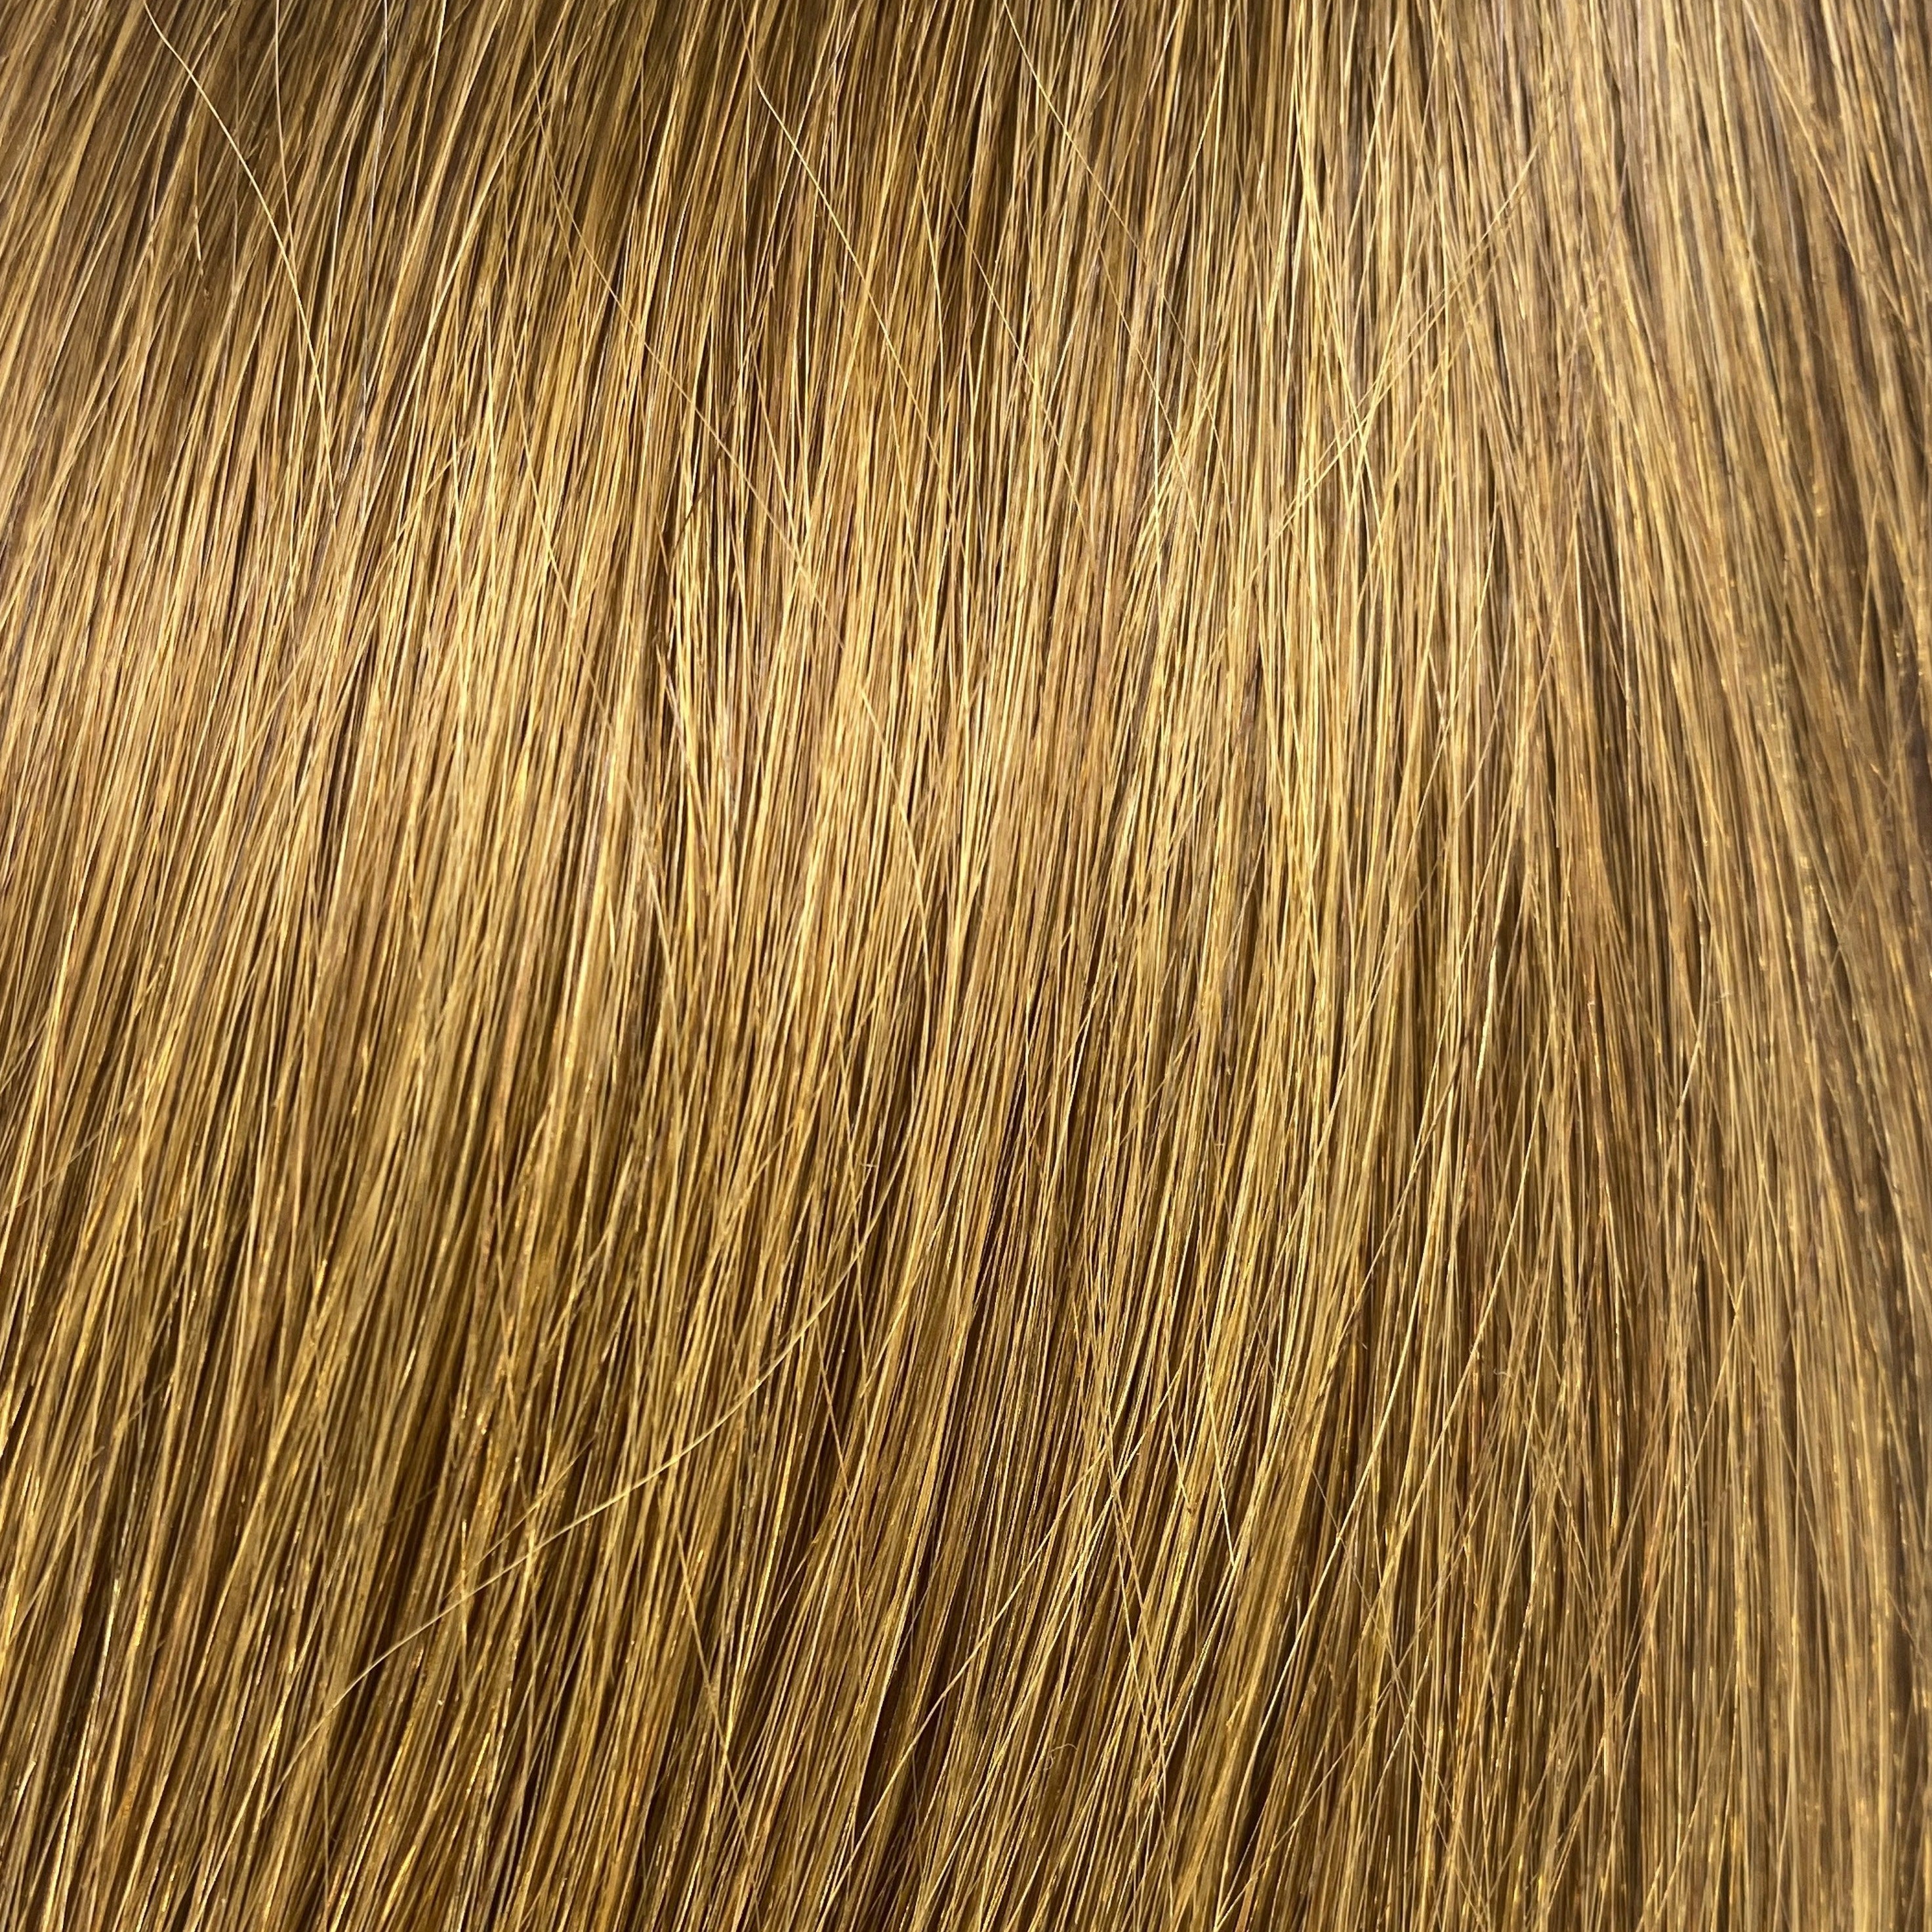 Velo Sale #2&27 - 20 inches - Chestnut into Copper Golden Light Blonde Ombre - Image 2